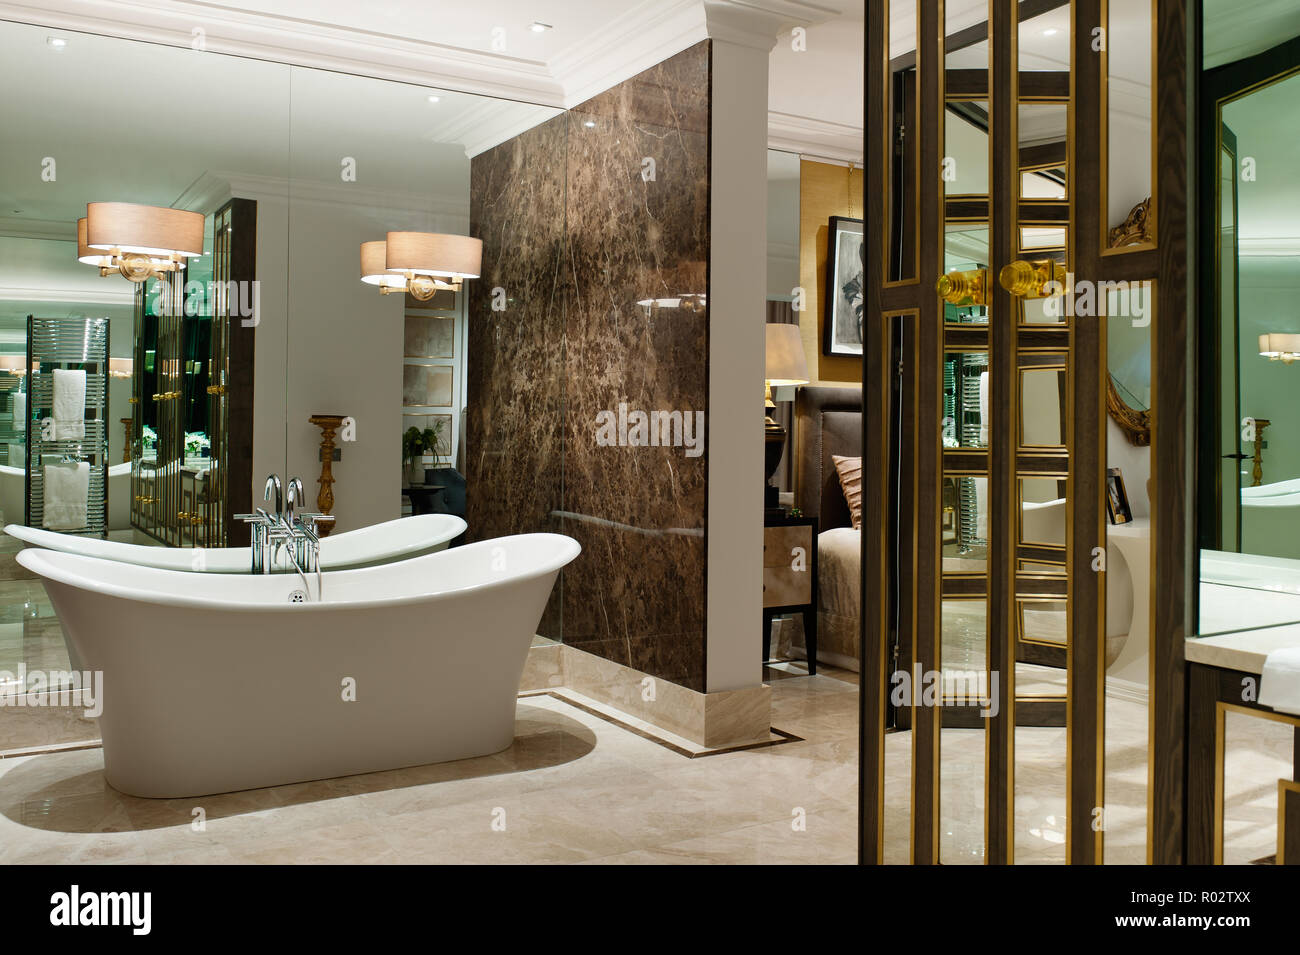 Luxury ensuite bathroom with mirrored wall Stock Photo